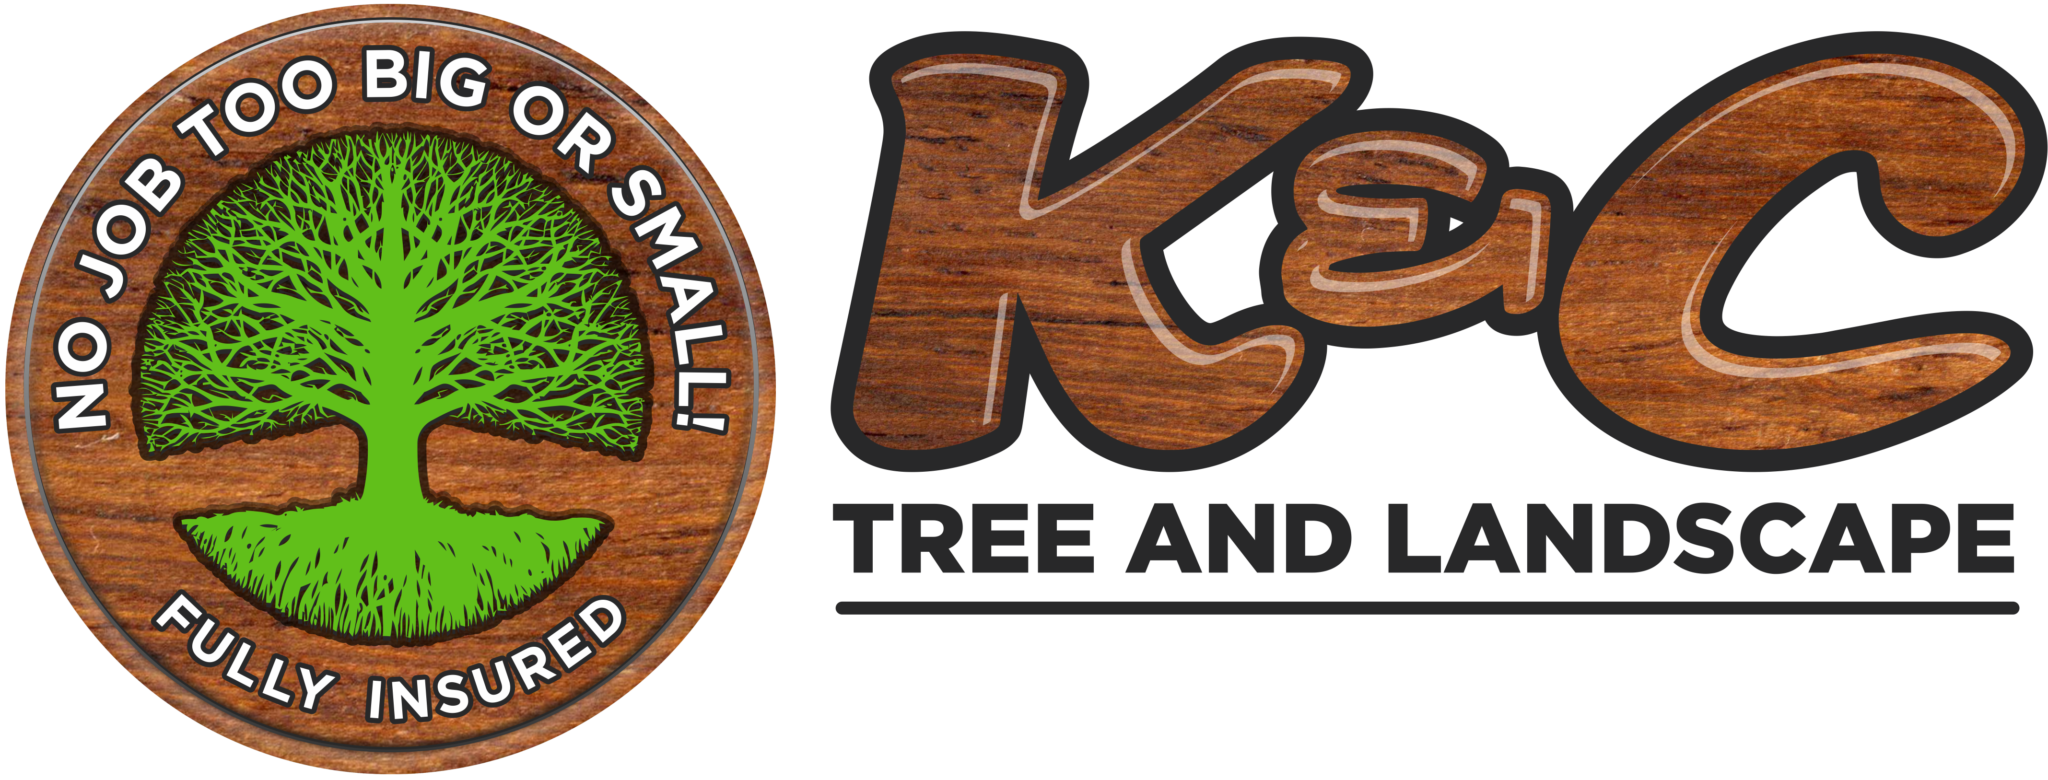 K&C Tree and Landscape Launches Emergency Tree Removal Service for Storm-Damaged Trees